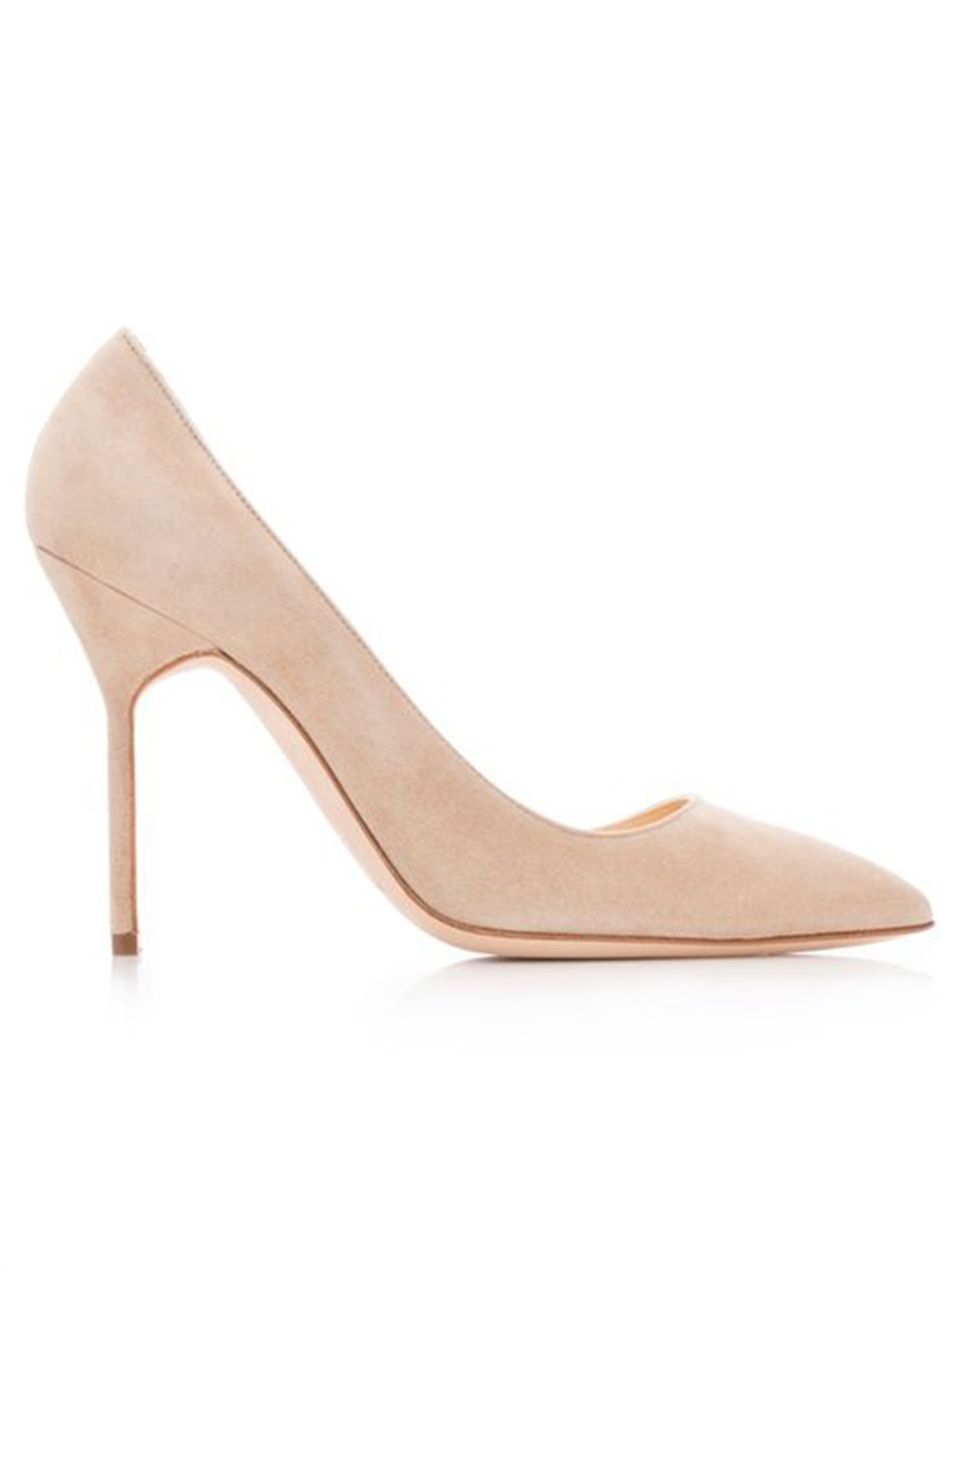 Best nude court shoes inspired by Queen Letizia of Spain